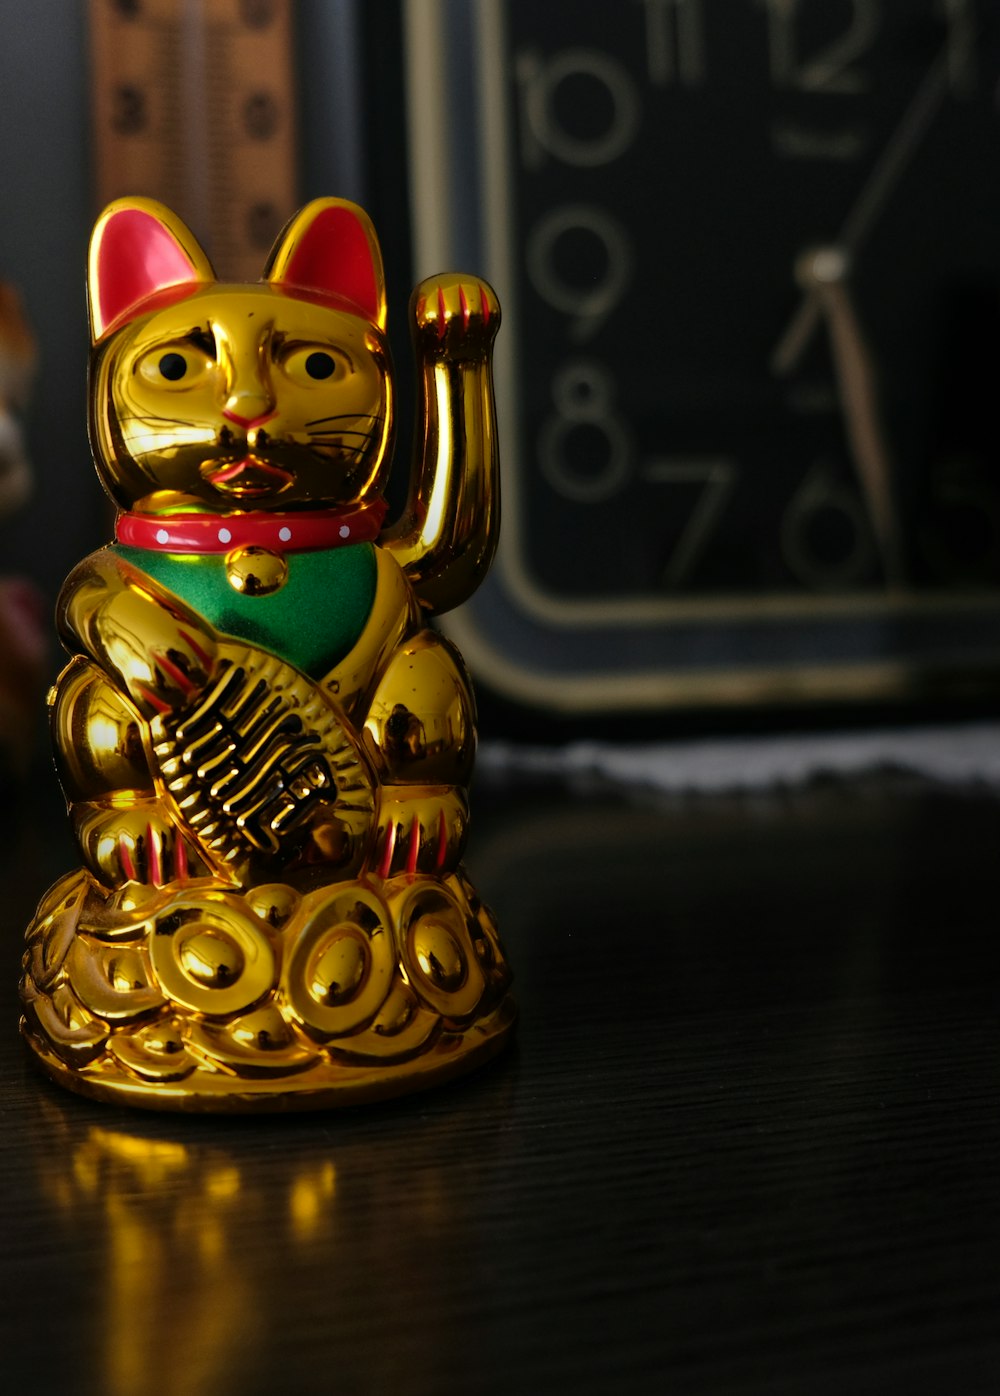 gold and green cat figurine